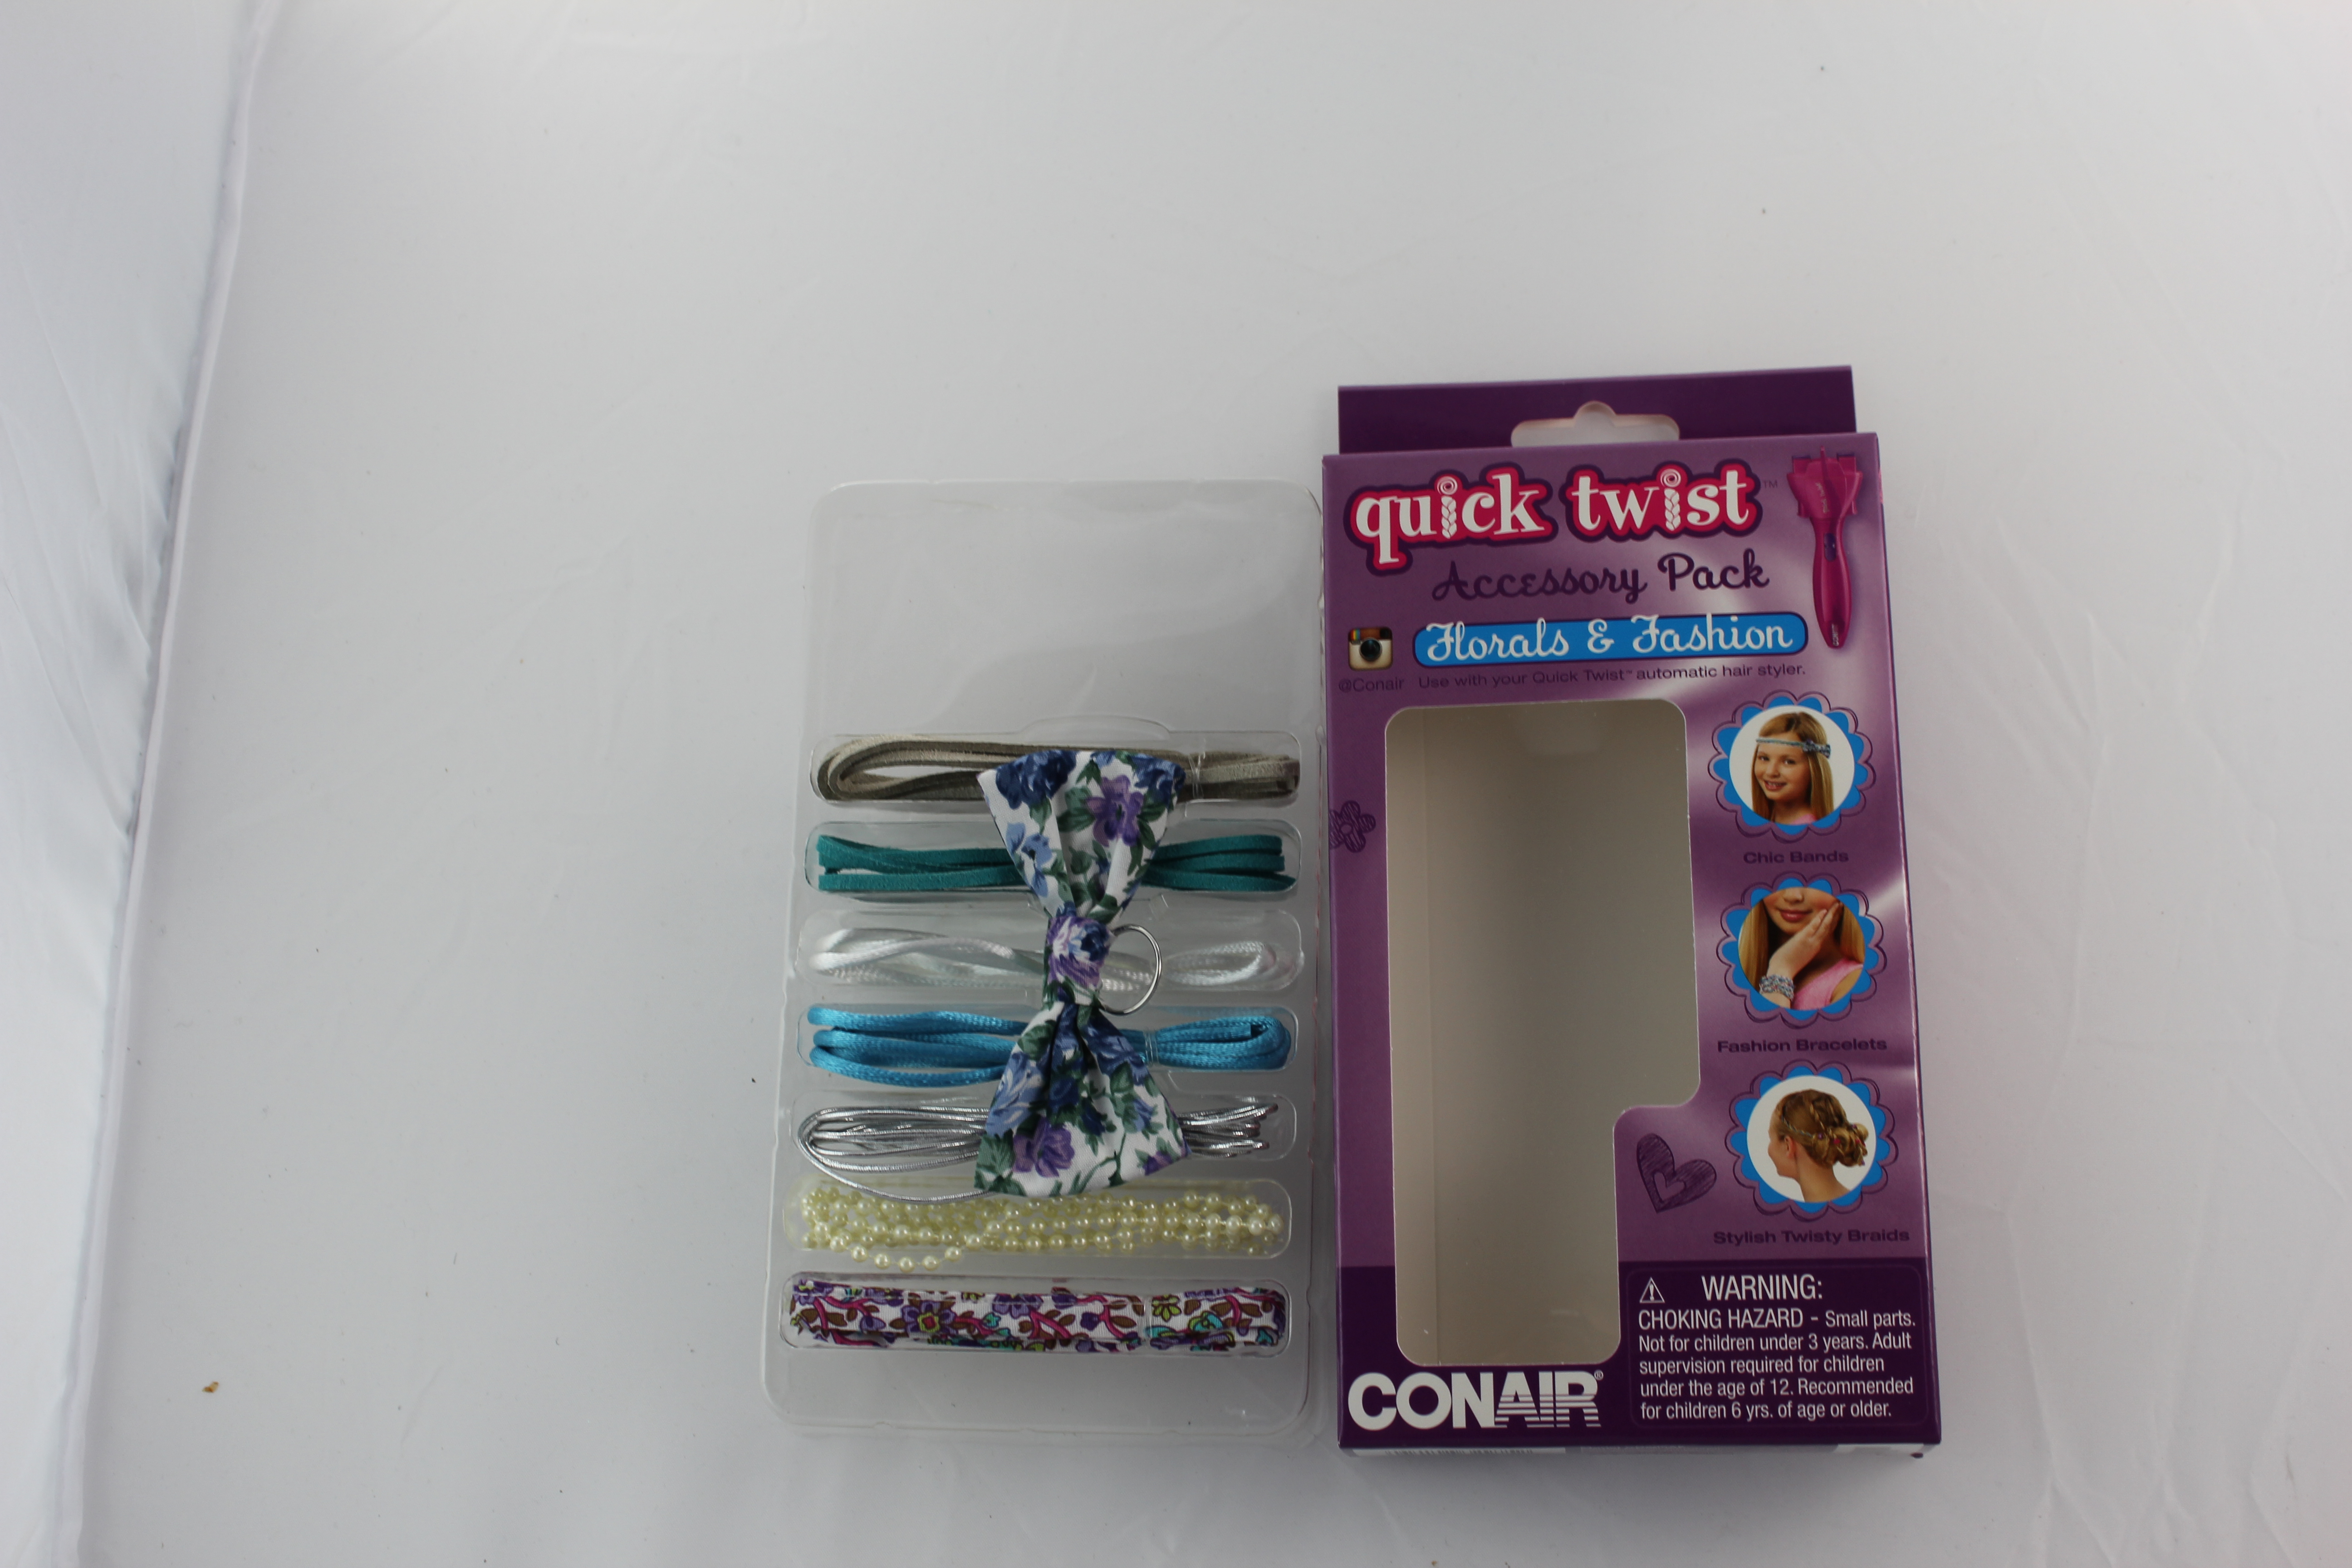 CD05AF, Conair accessory pack